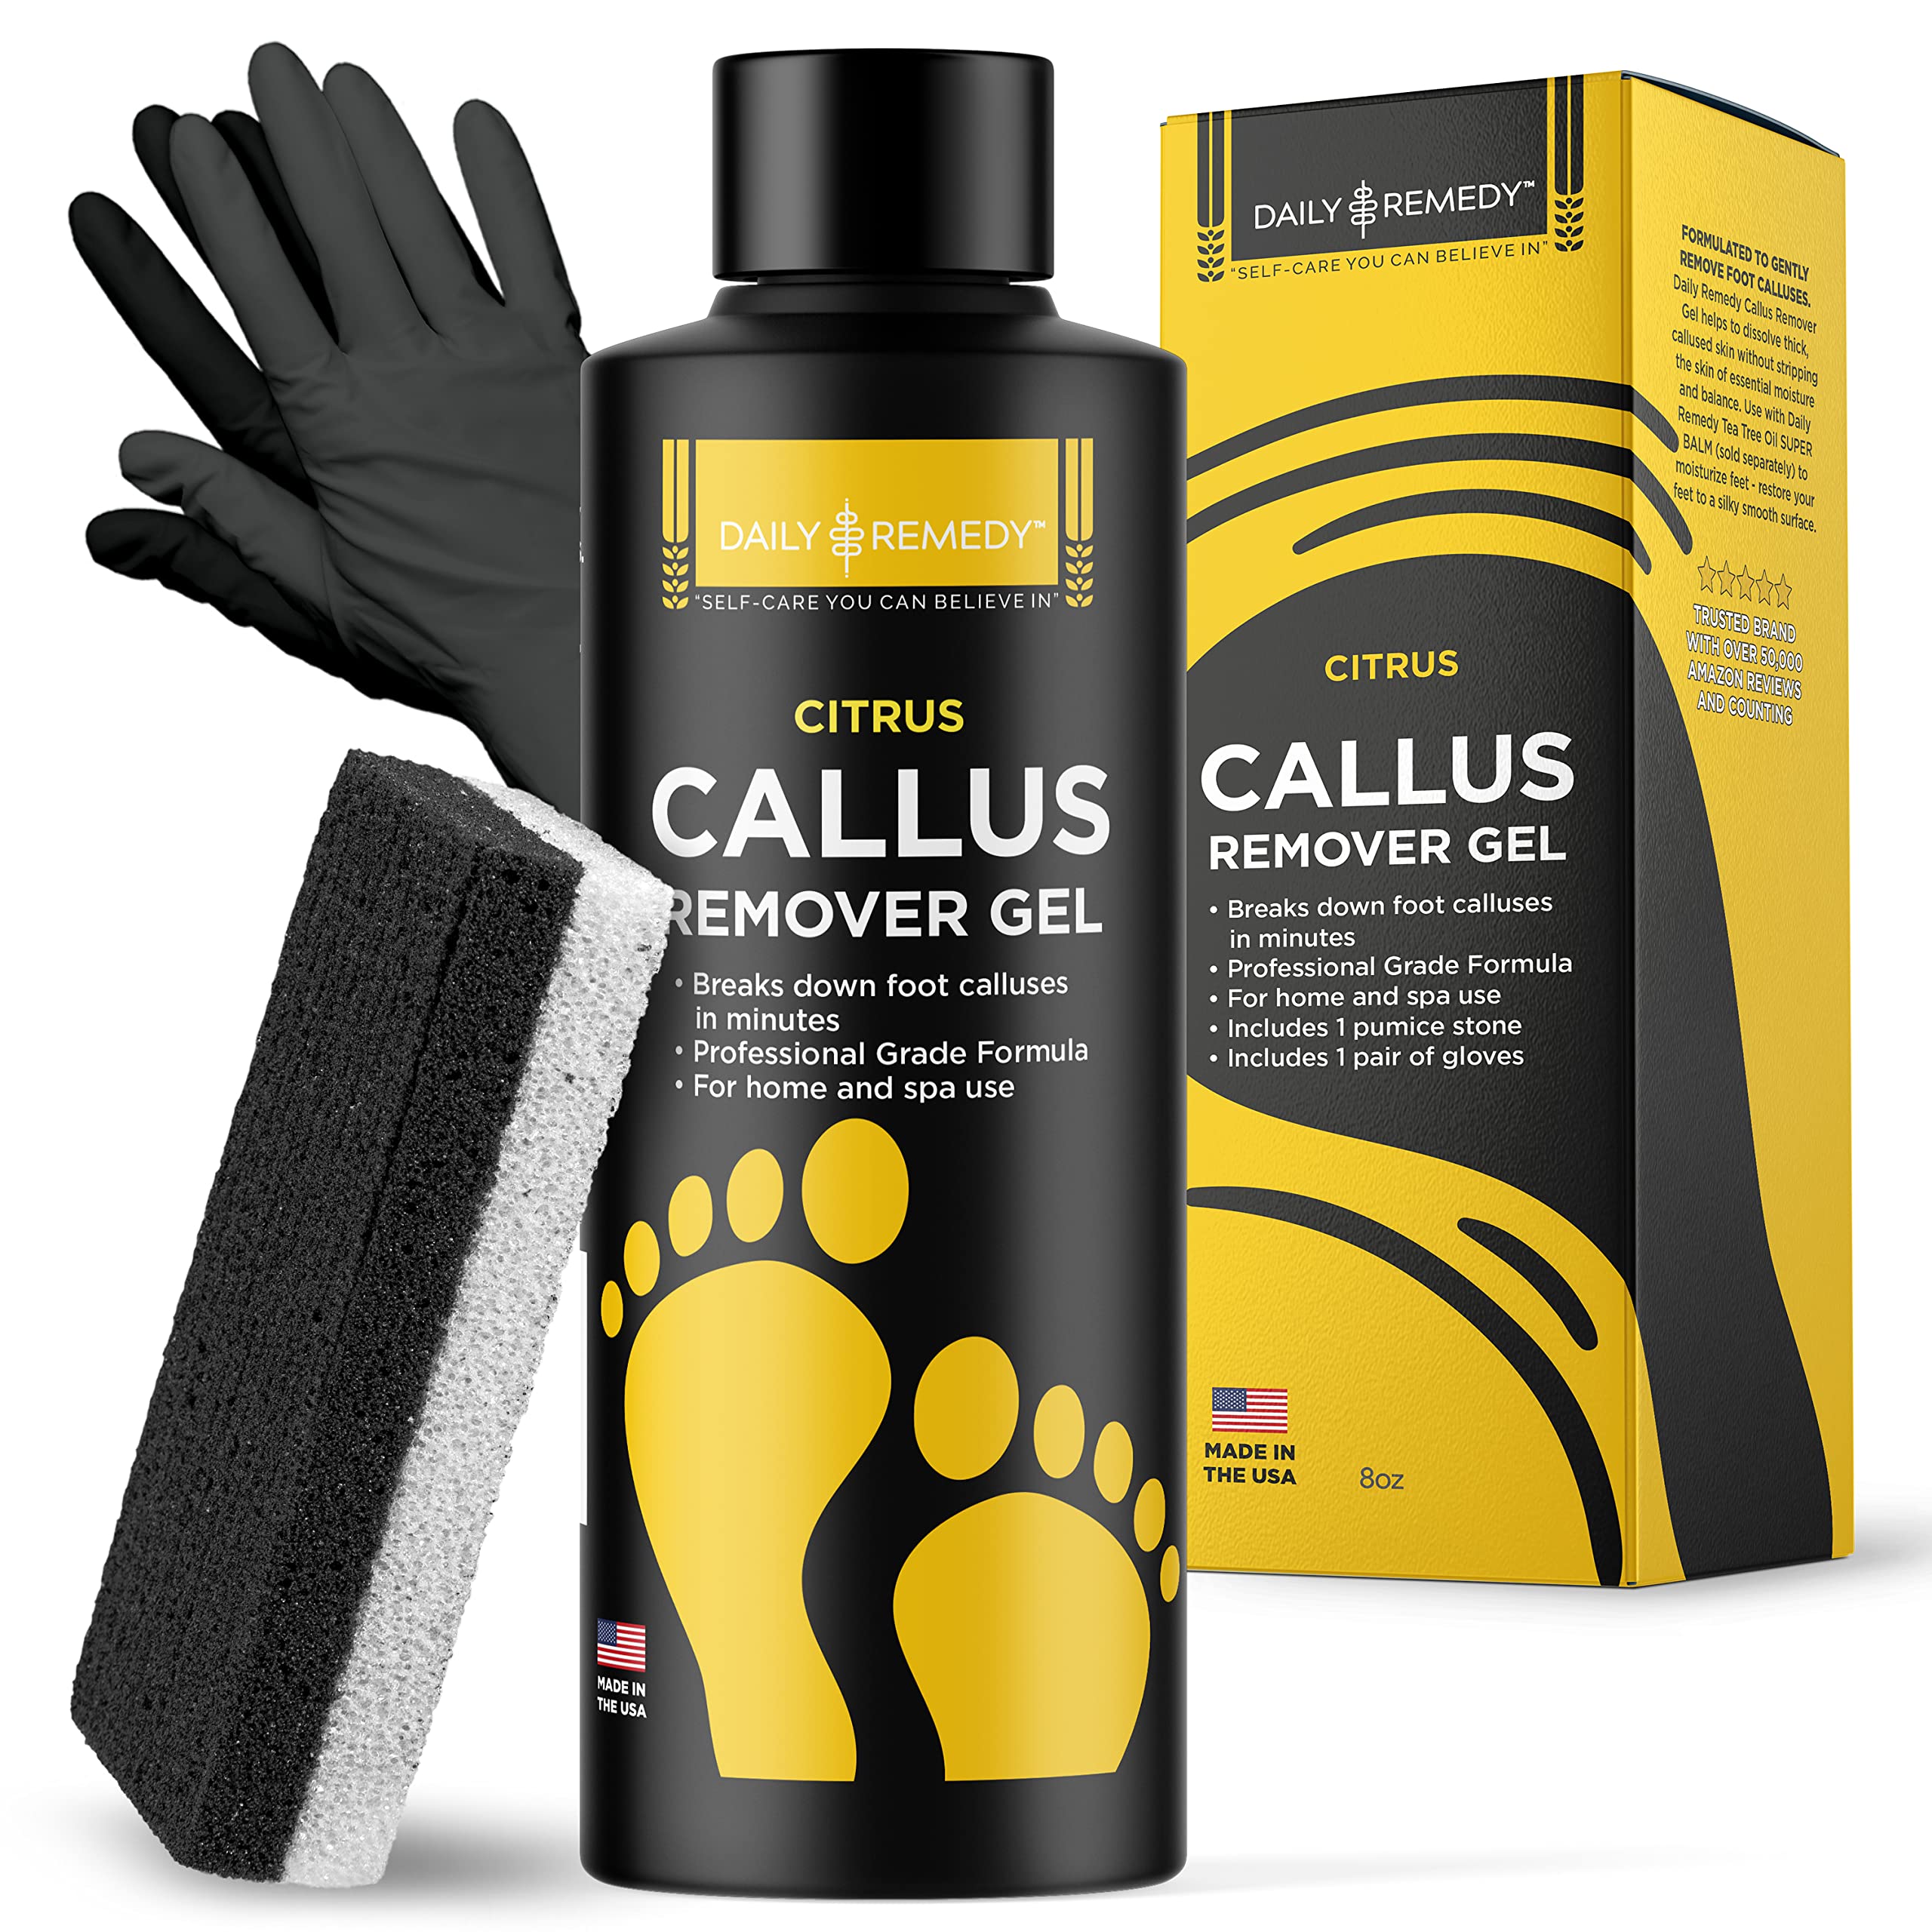 Foot Callus Remover Gel 6oz by Love, Lori - Callus Remover for Feet & Dead Skin Remover for Feet - Works with Foot Scrubber, Pumice Stone for Soft